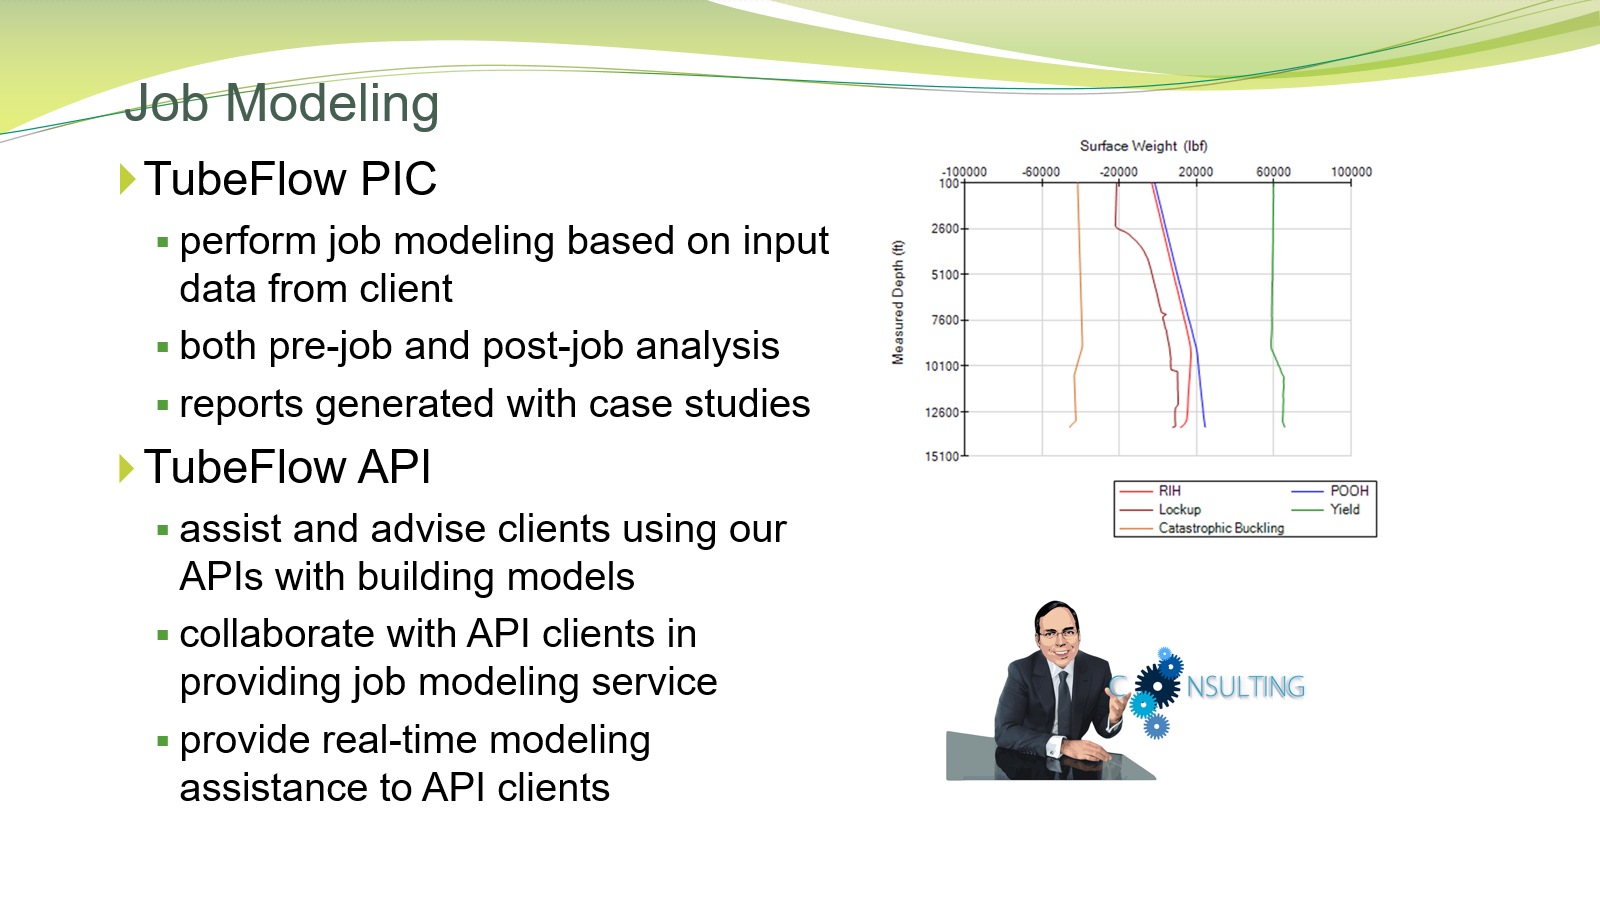 Job Modeling: TubeFlow PIC-perform job modeling based on input data from client, TubeFlow API-provide real-time modeling assistance to API client